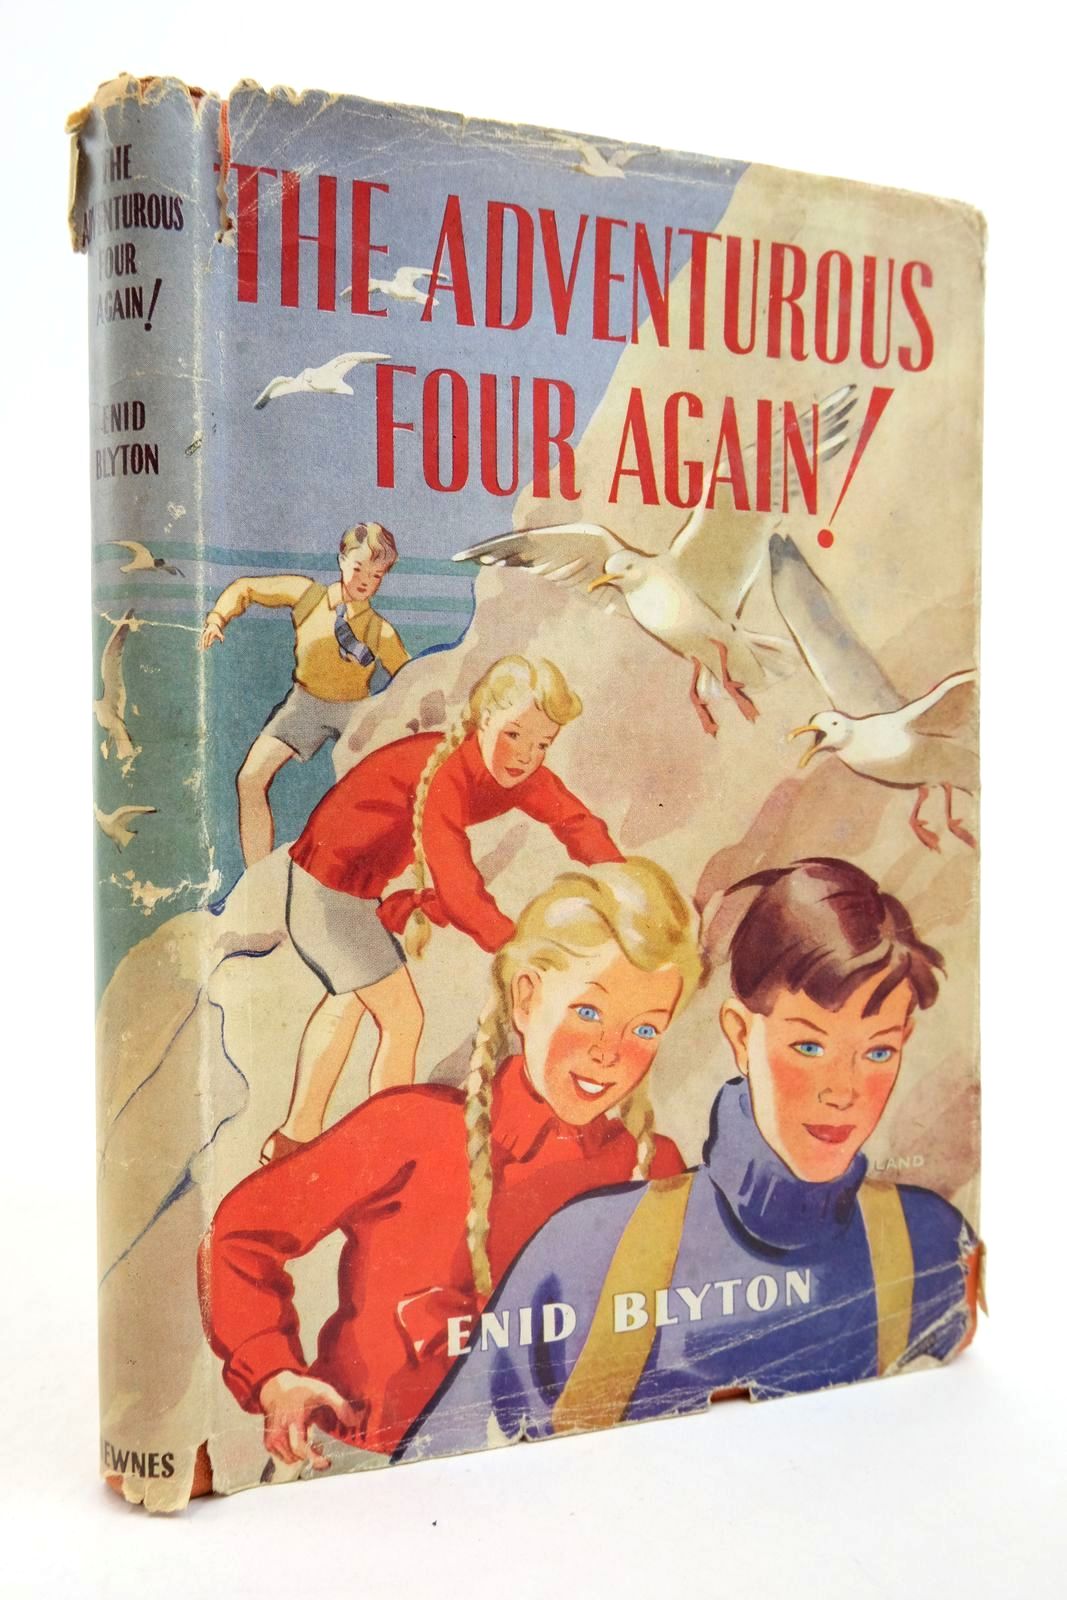 Photo of THE ADVENTUROUS FOUR AGAIN! written by Blyton, Enid illustrated by Land, Jessie published by George Newnes Ltd. (STOCK CODE: 2140012)  for sale by Stella & Rose's Books